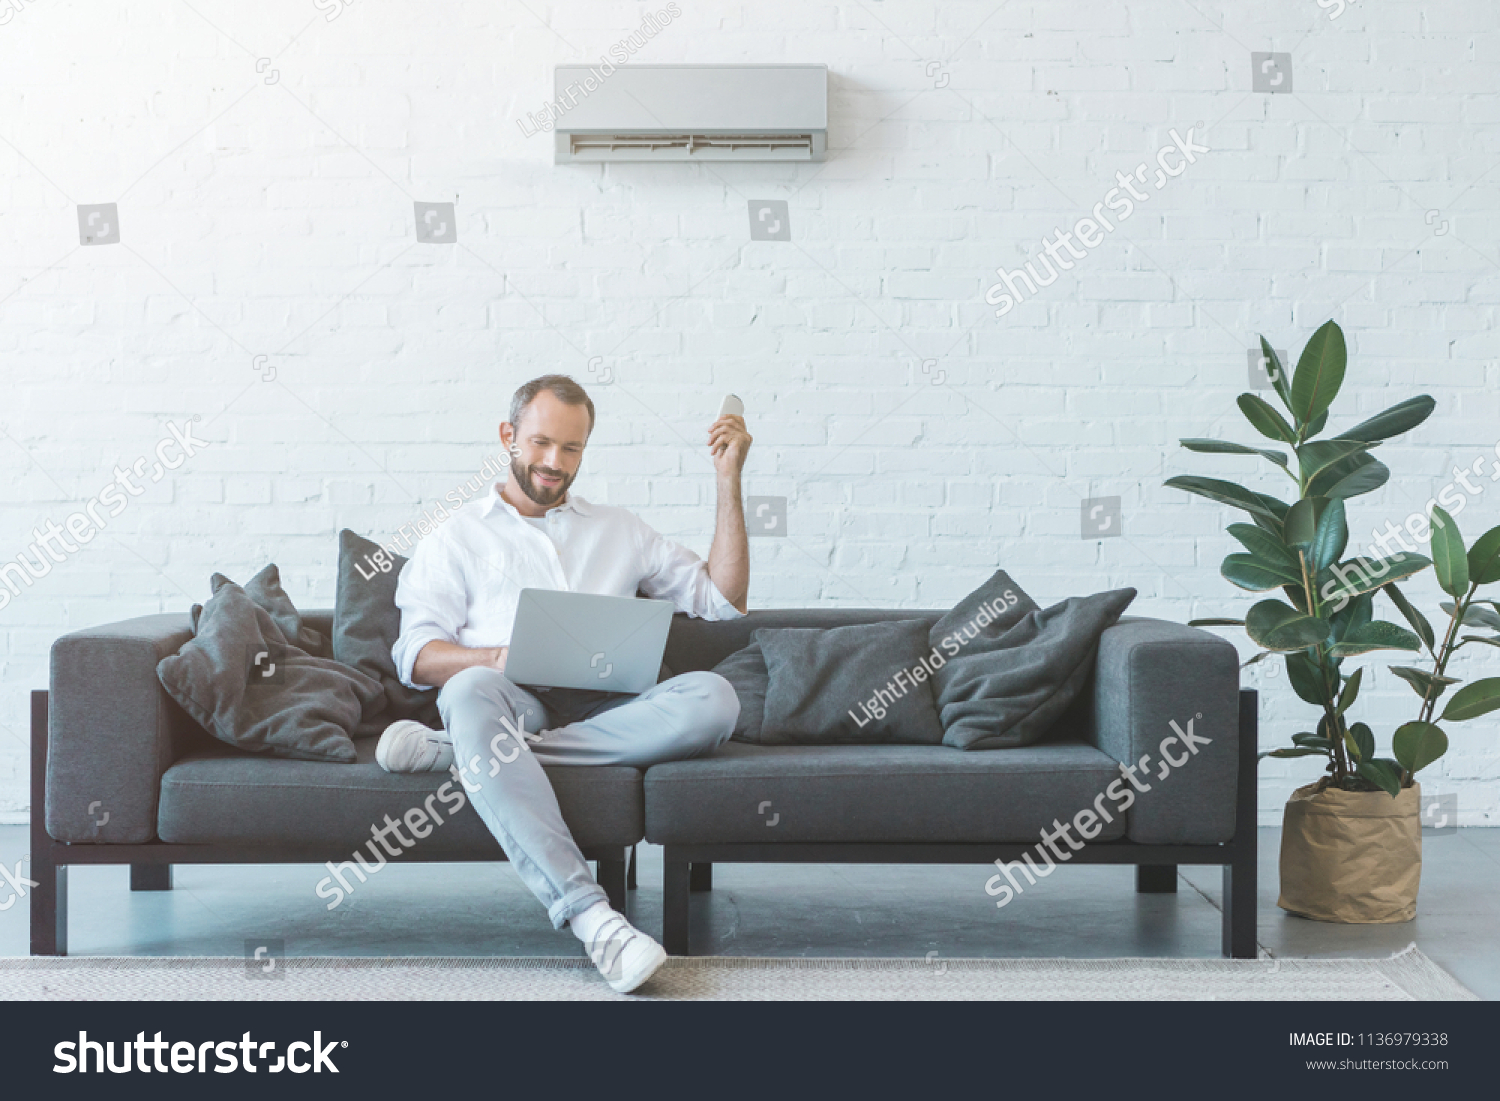 man turning on air conditioner with remote control while using laptop on sofa #1136979338